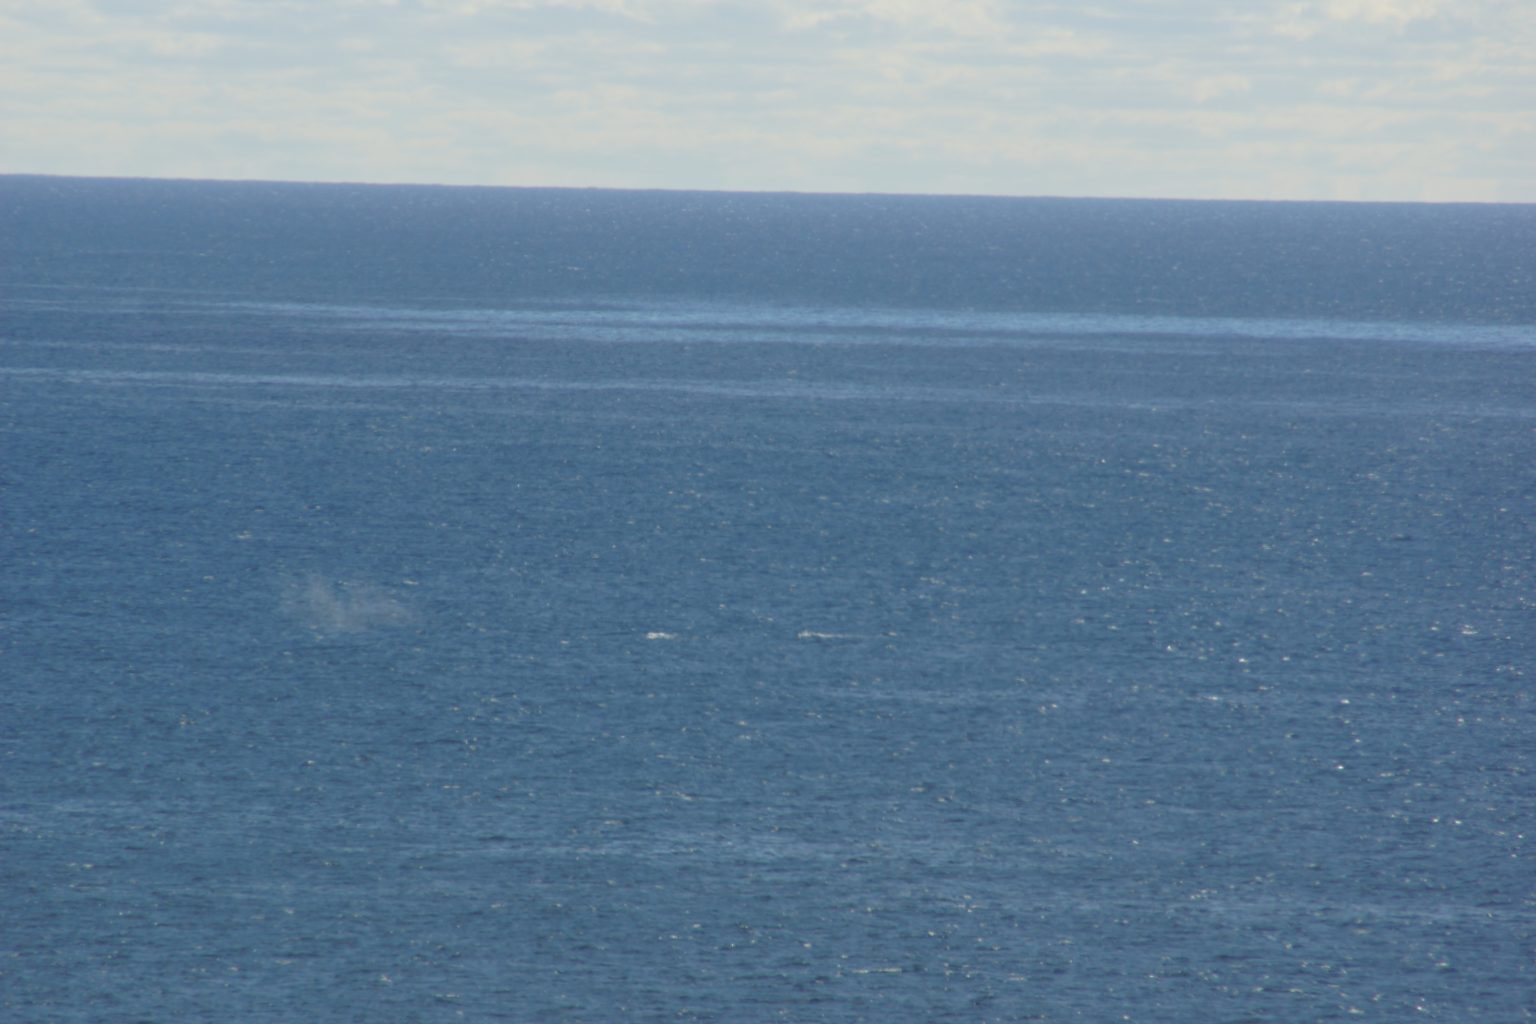 Some whales not far from the coast.